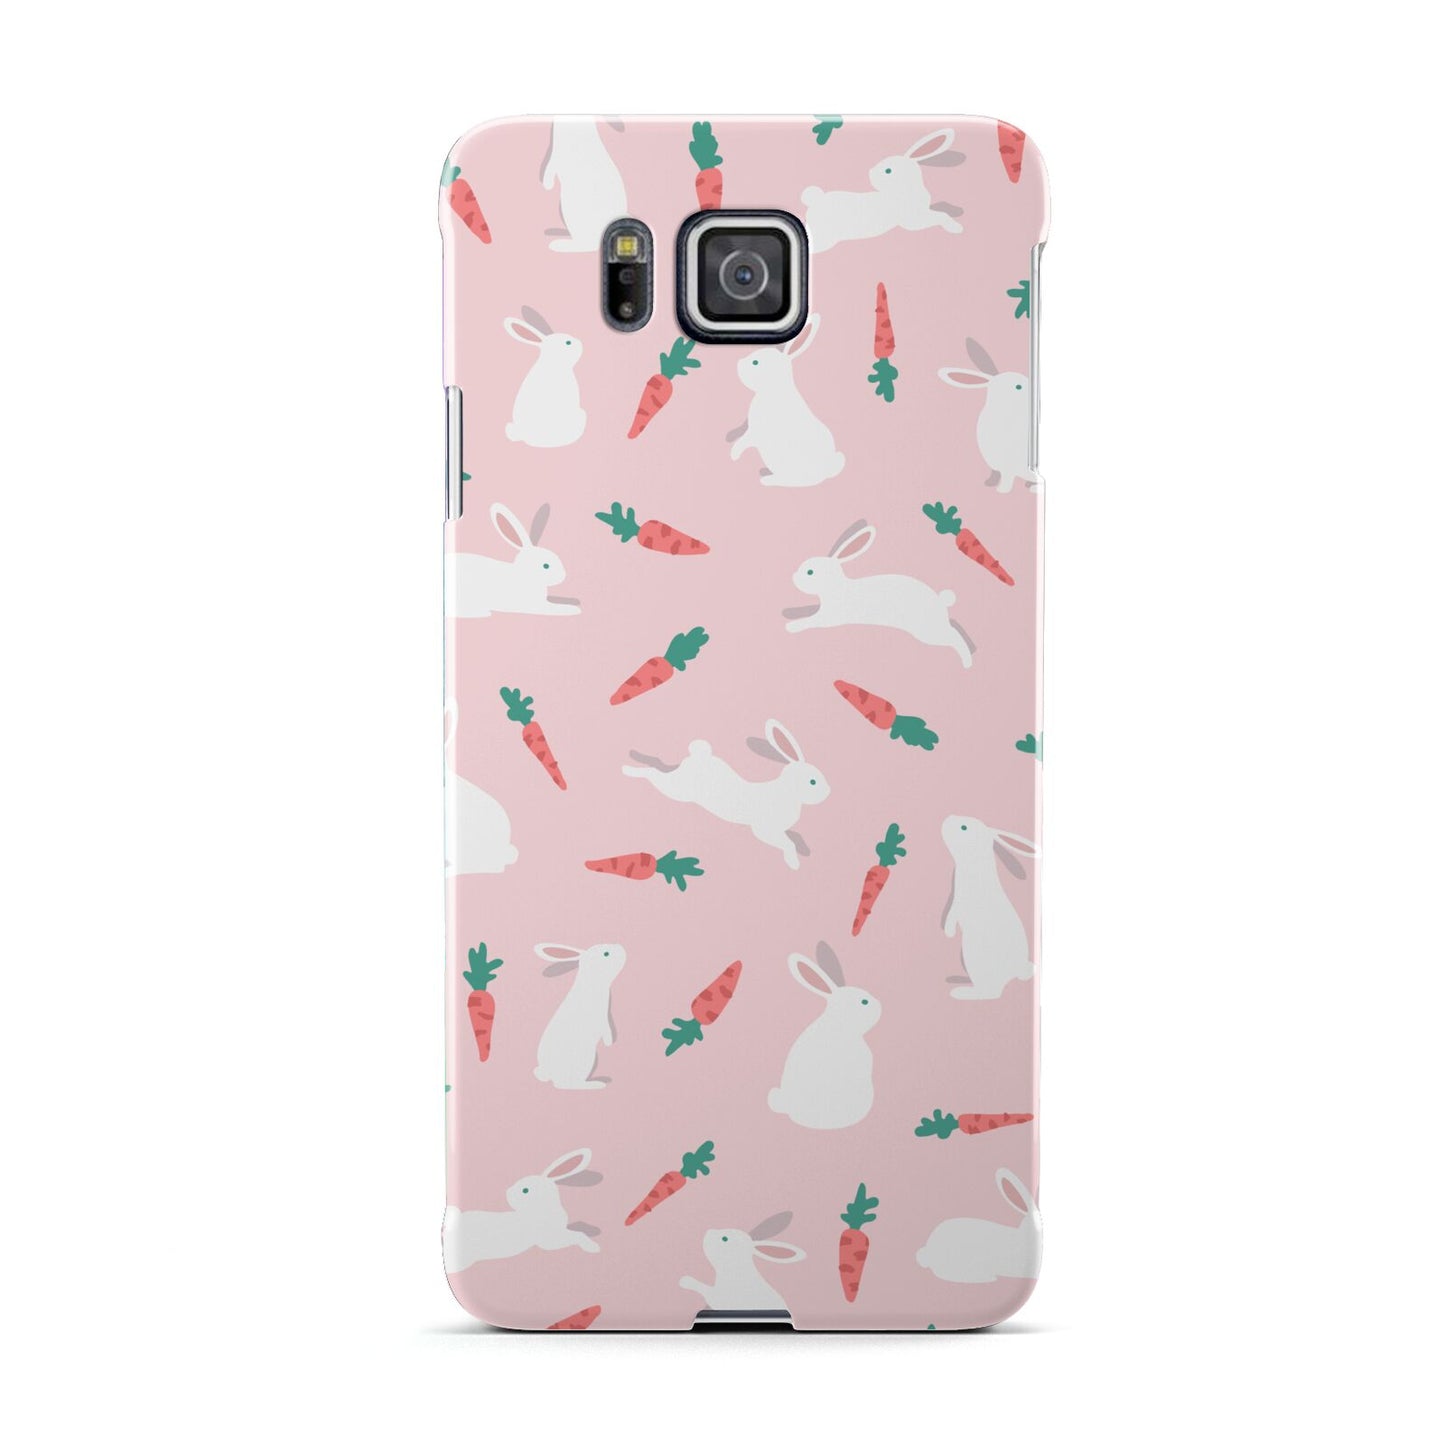 Easter Bunny And Carrot Samsung Galaxy Alpha Case